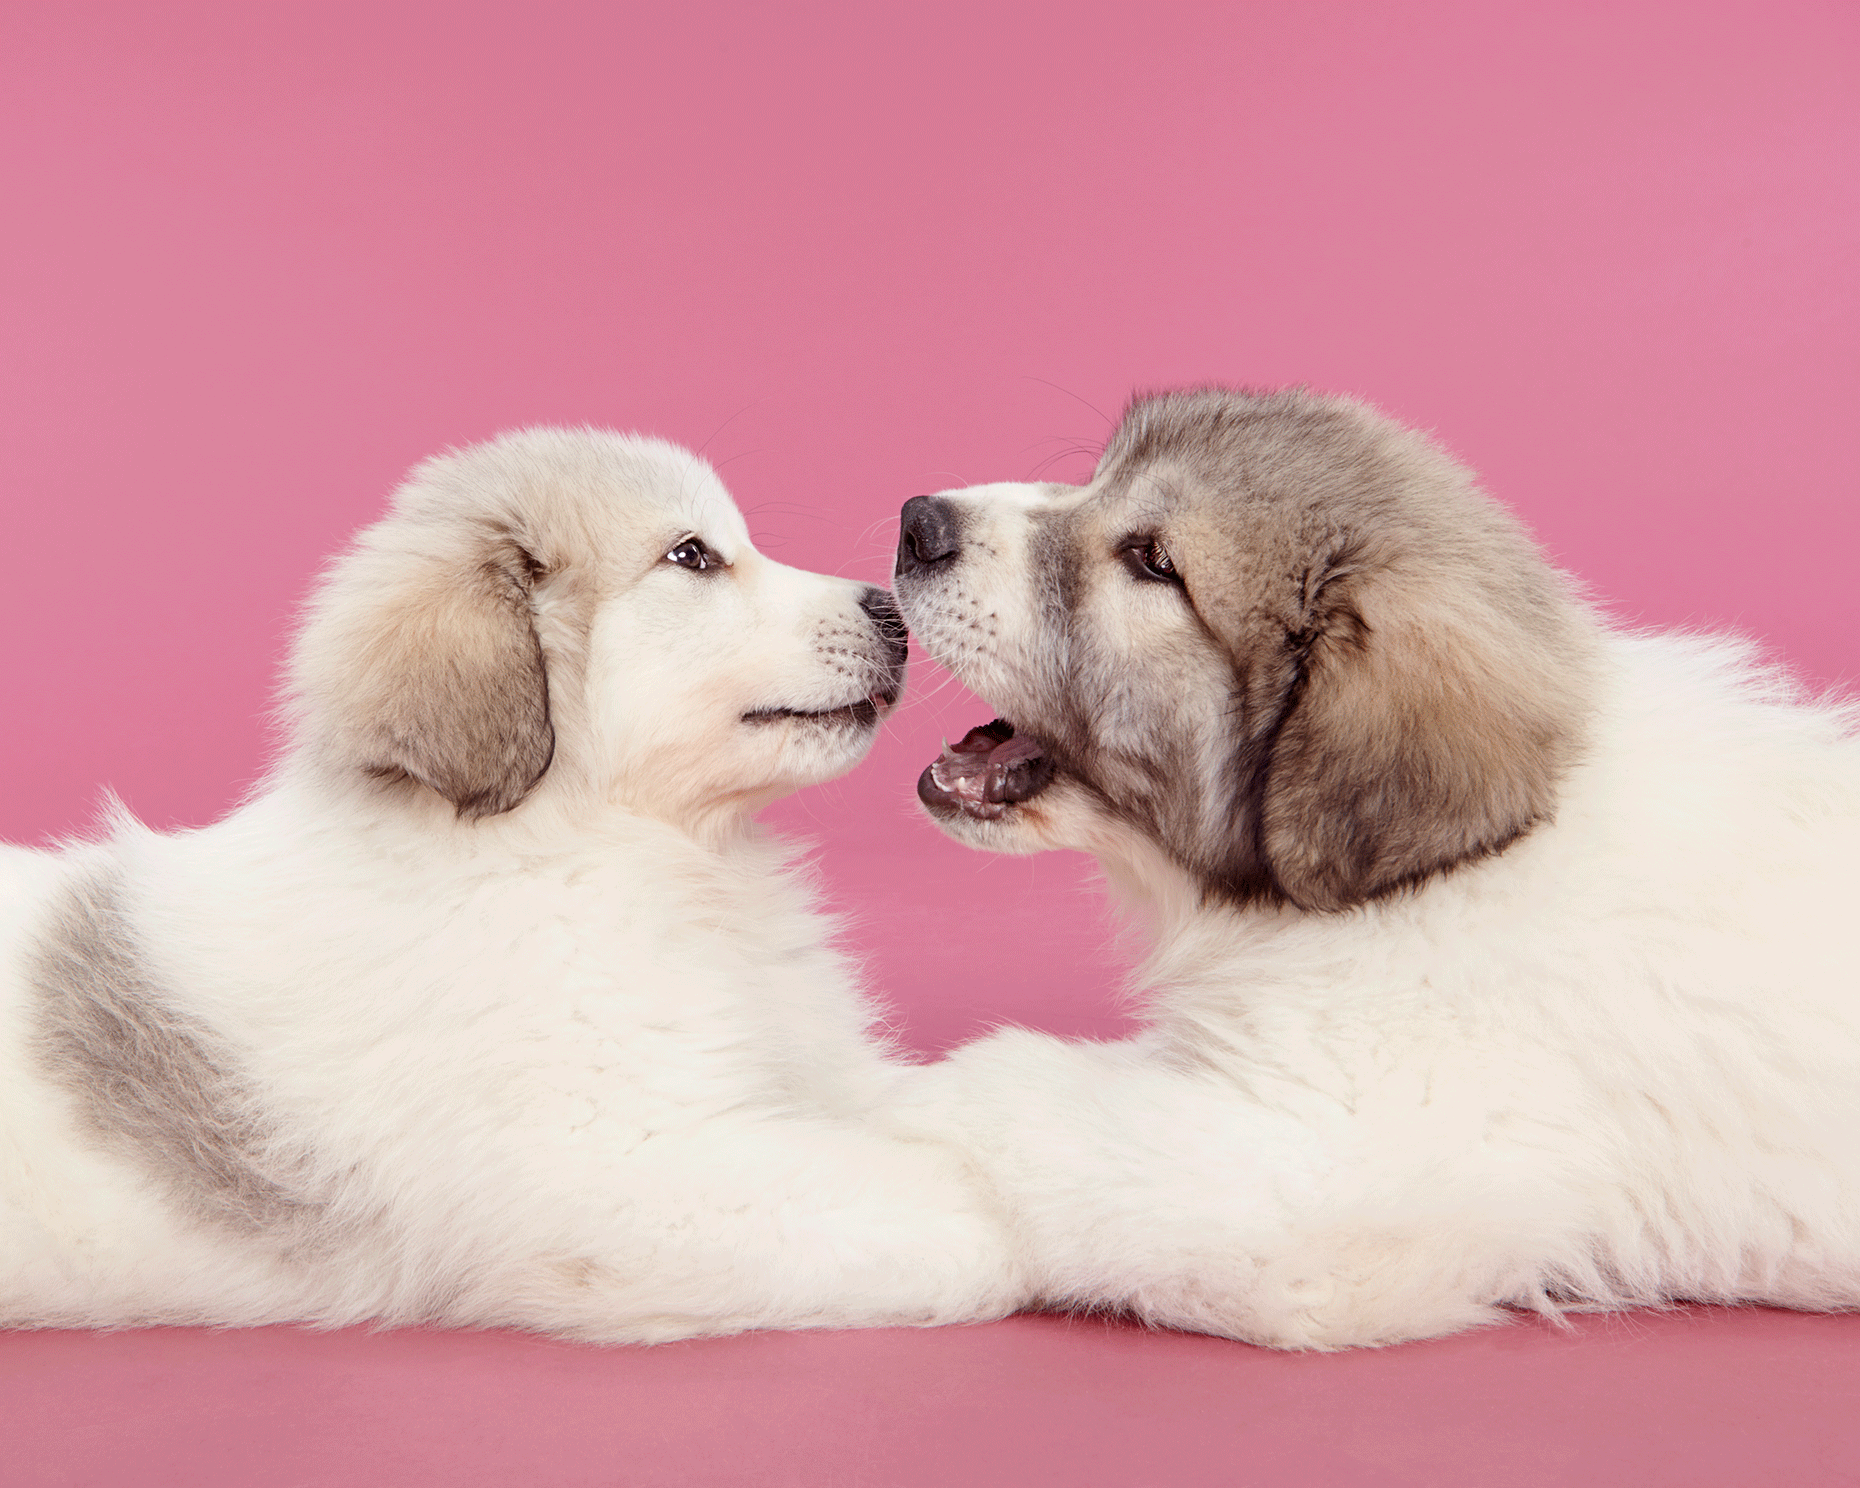 Great Pyrenees puppies kissing